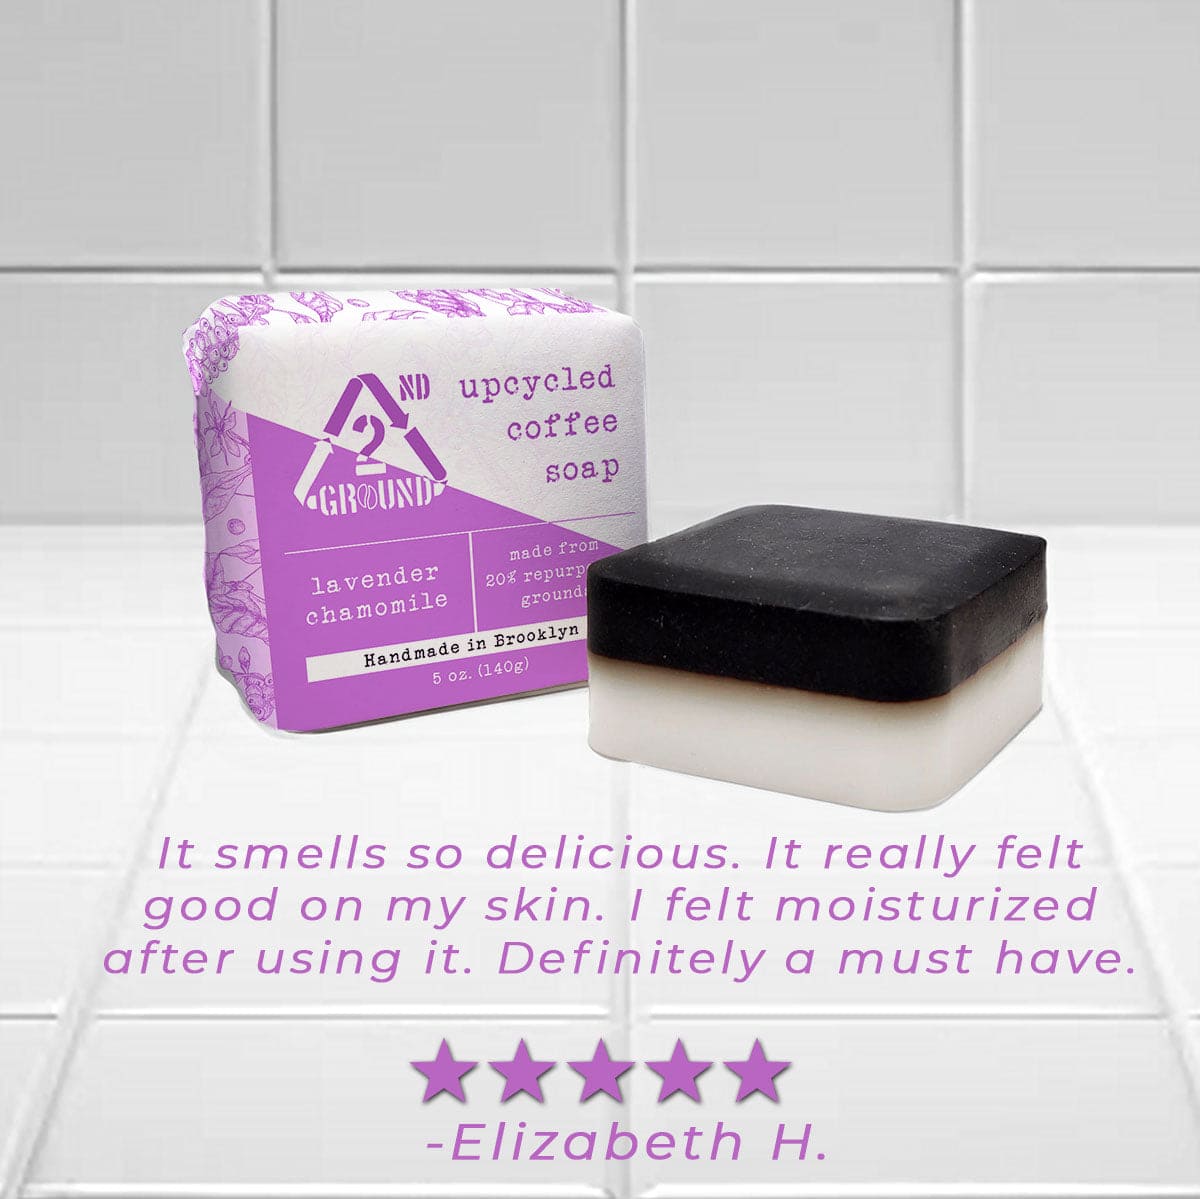 Customer review of lavender upcycled coffee soap